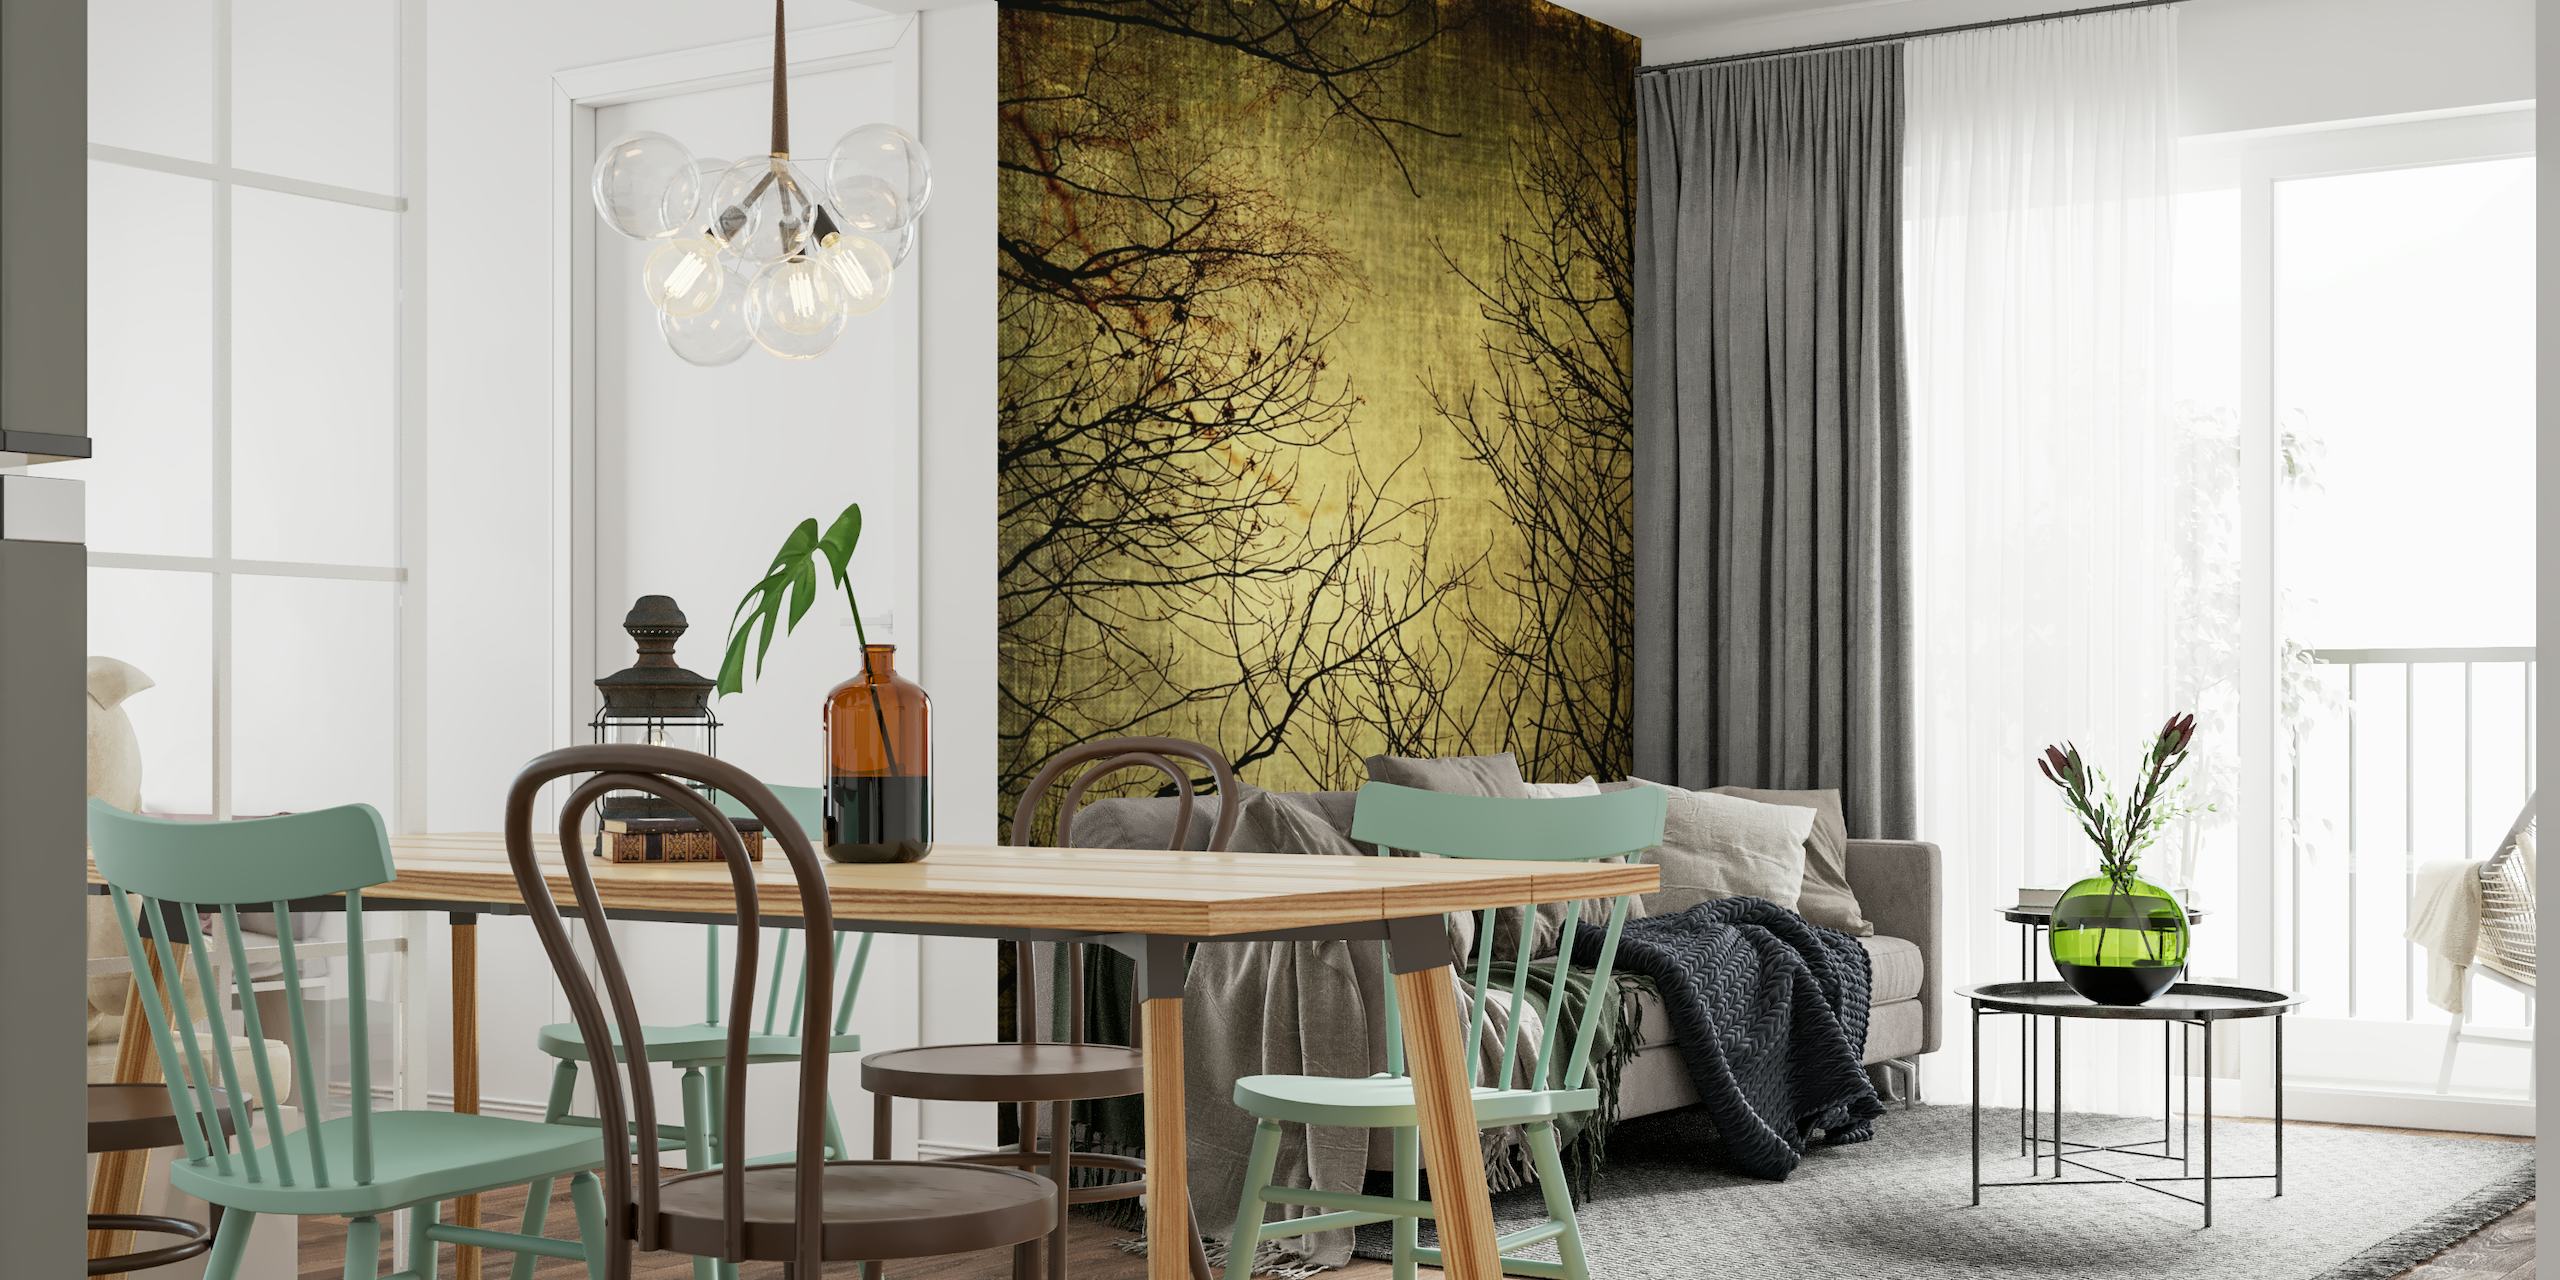 Mystic Light wall mural featuring sunlit branches against a textured backdrop